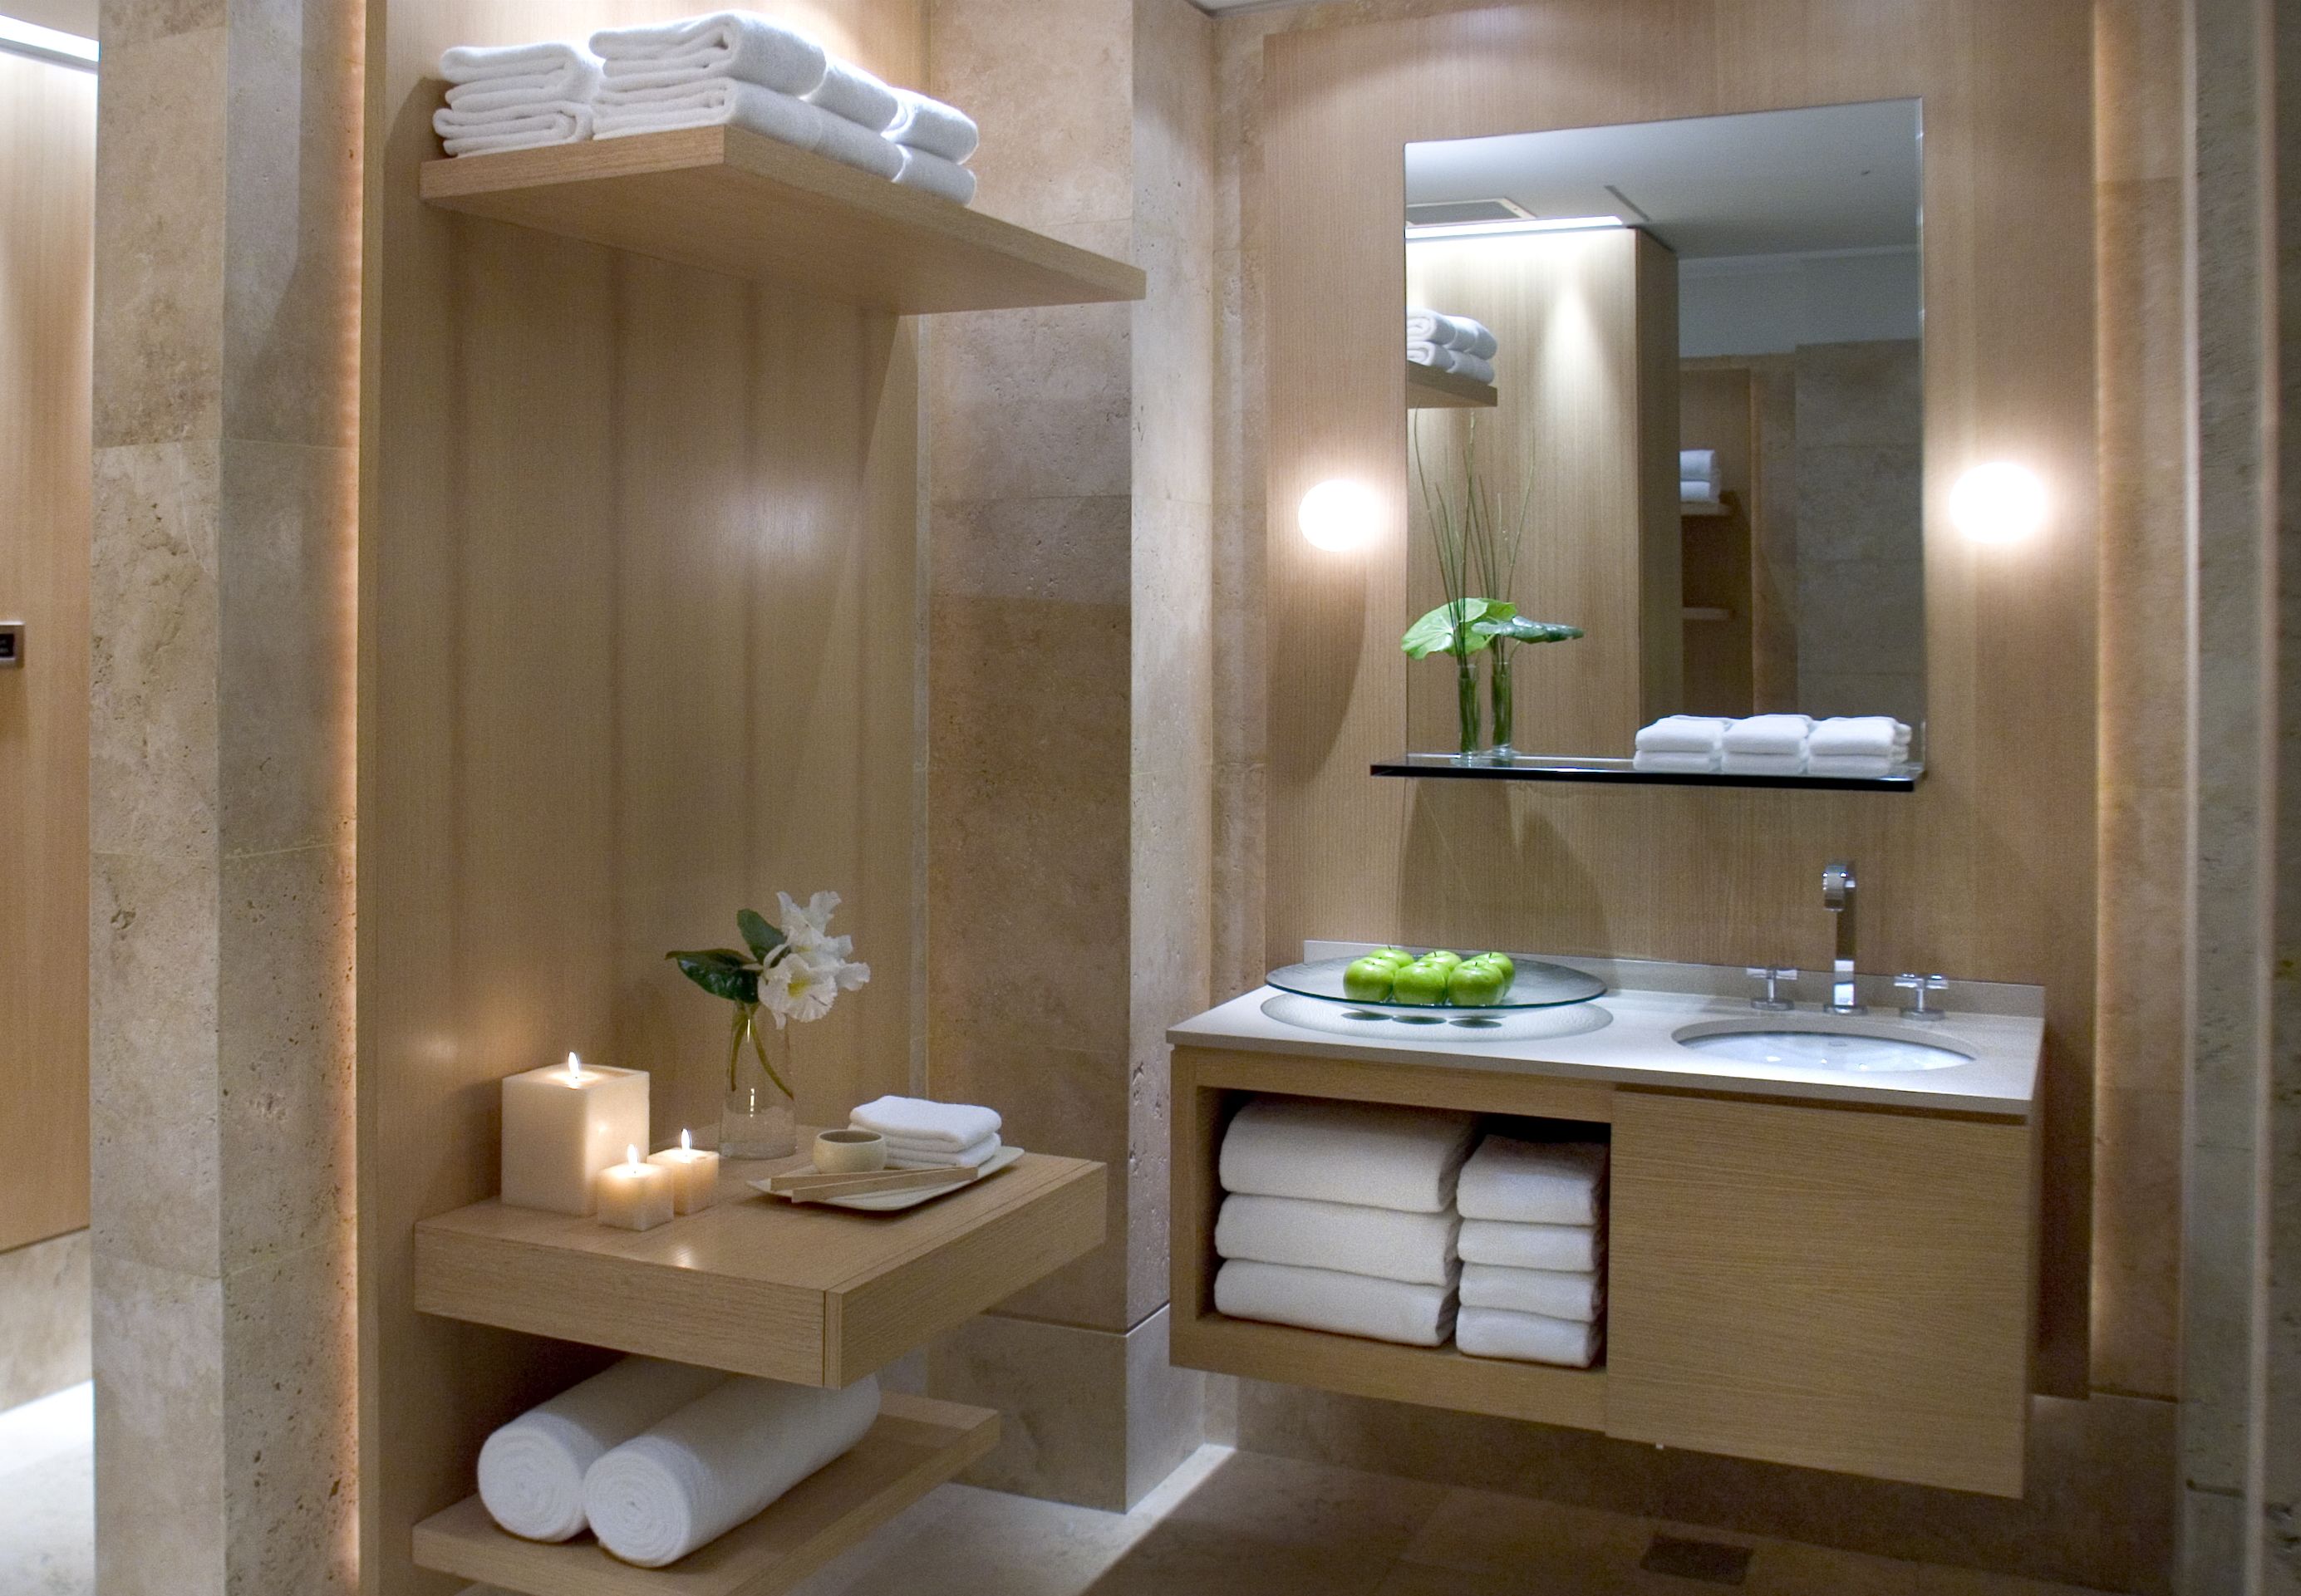 The 10 Best Hotel Towels To Transform Your Bathroom [2023]